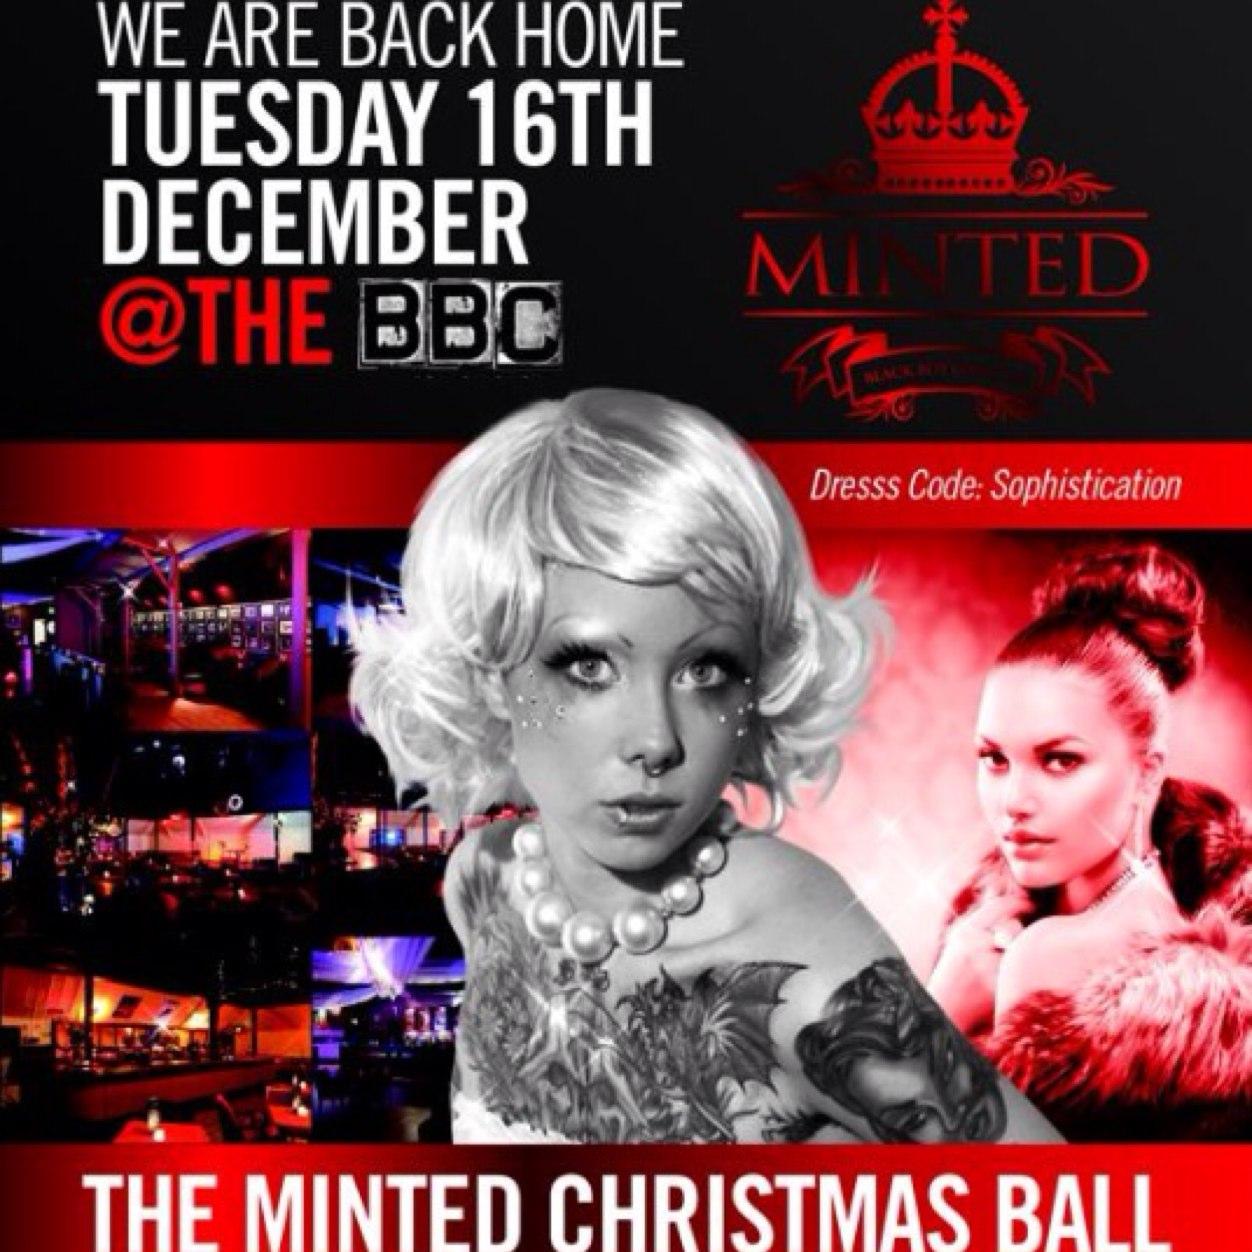 Minted has been the premier Monday student night for the last 3 years running in The University Of Northampton